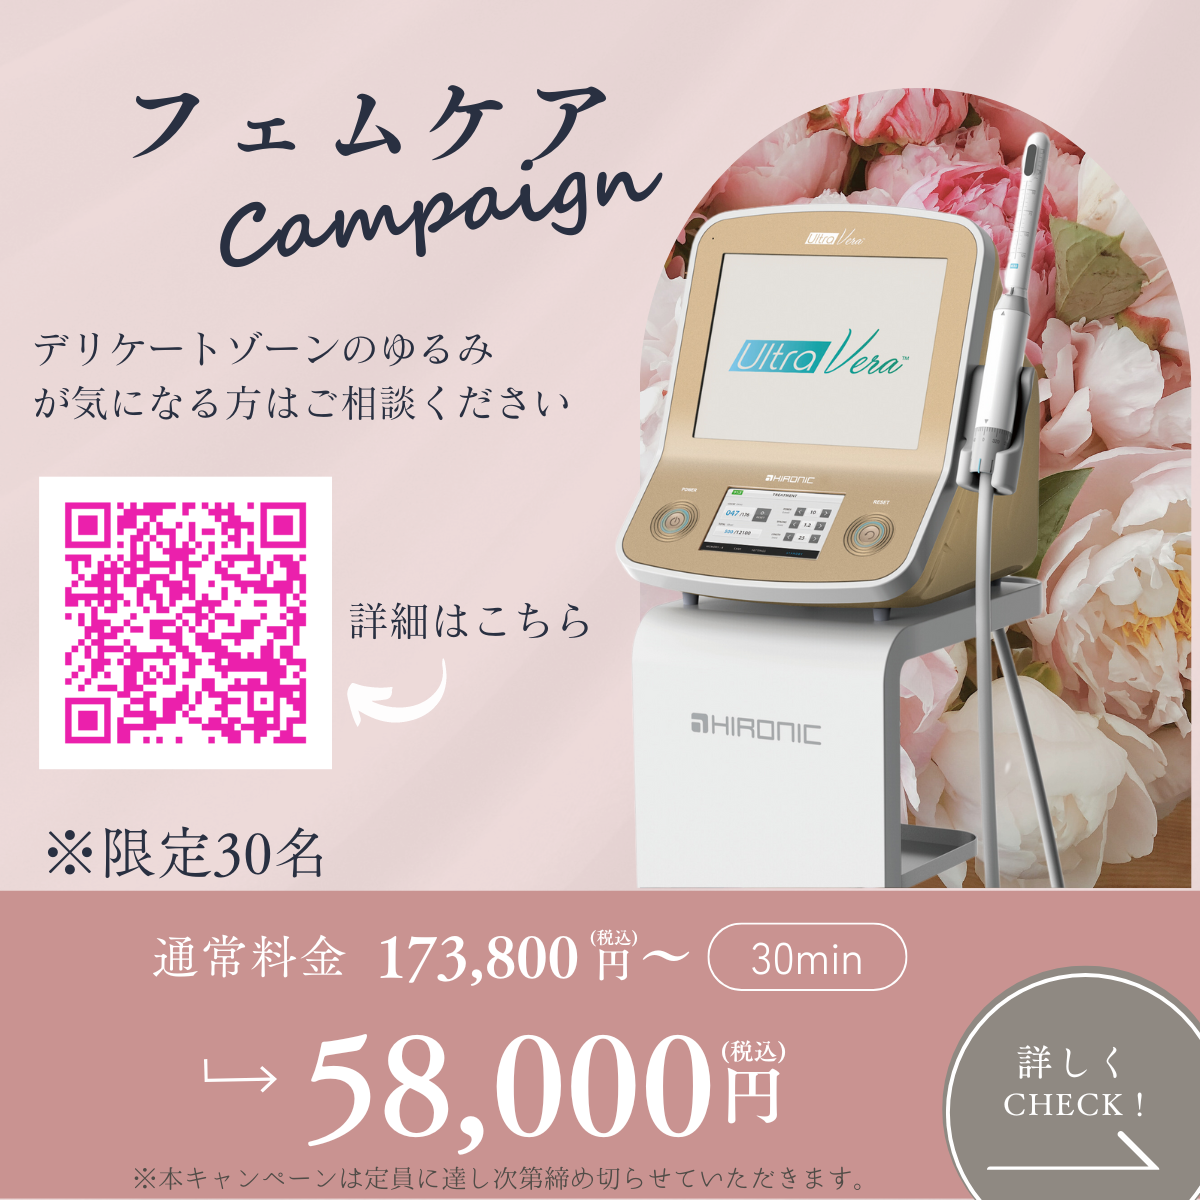 [May Campaign] Same-day reservations available ★ Gynecology